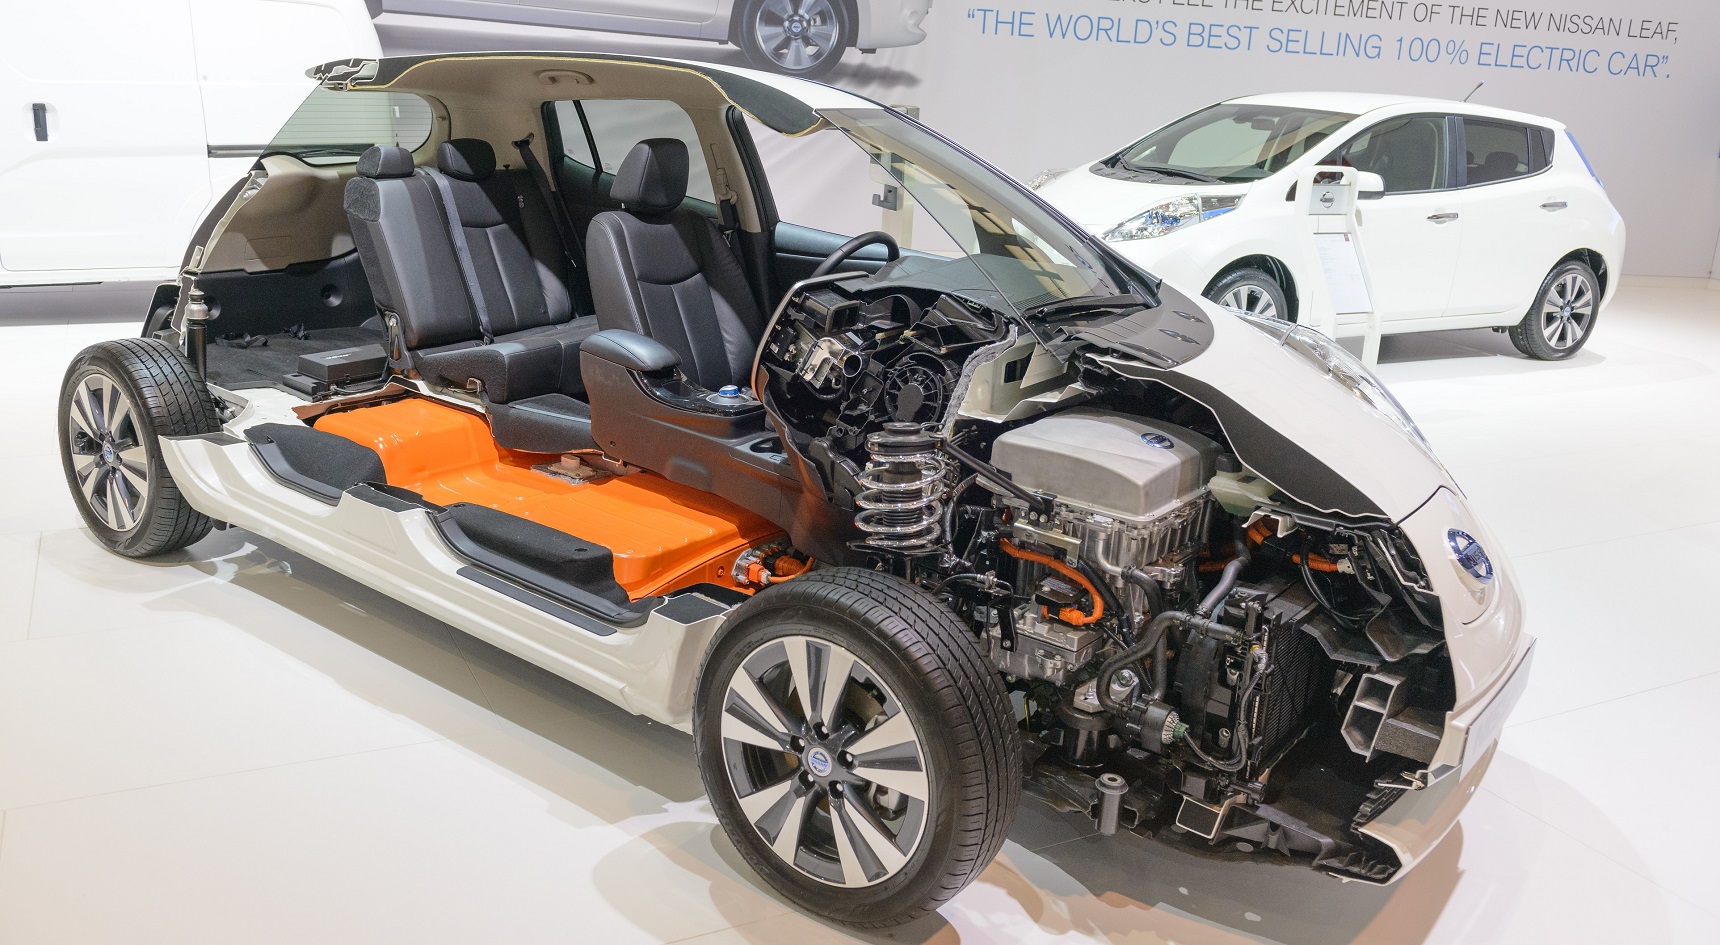 A cross section of Nissan Leaf. Image: iStock